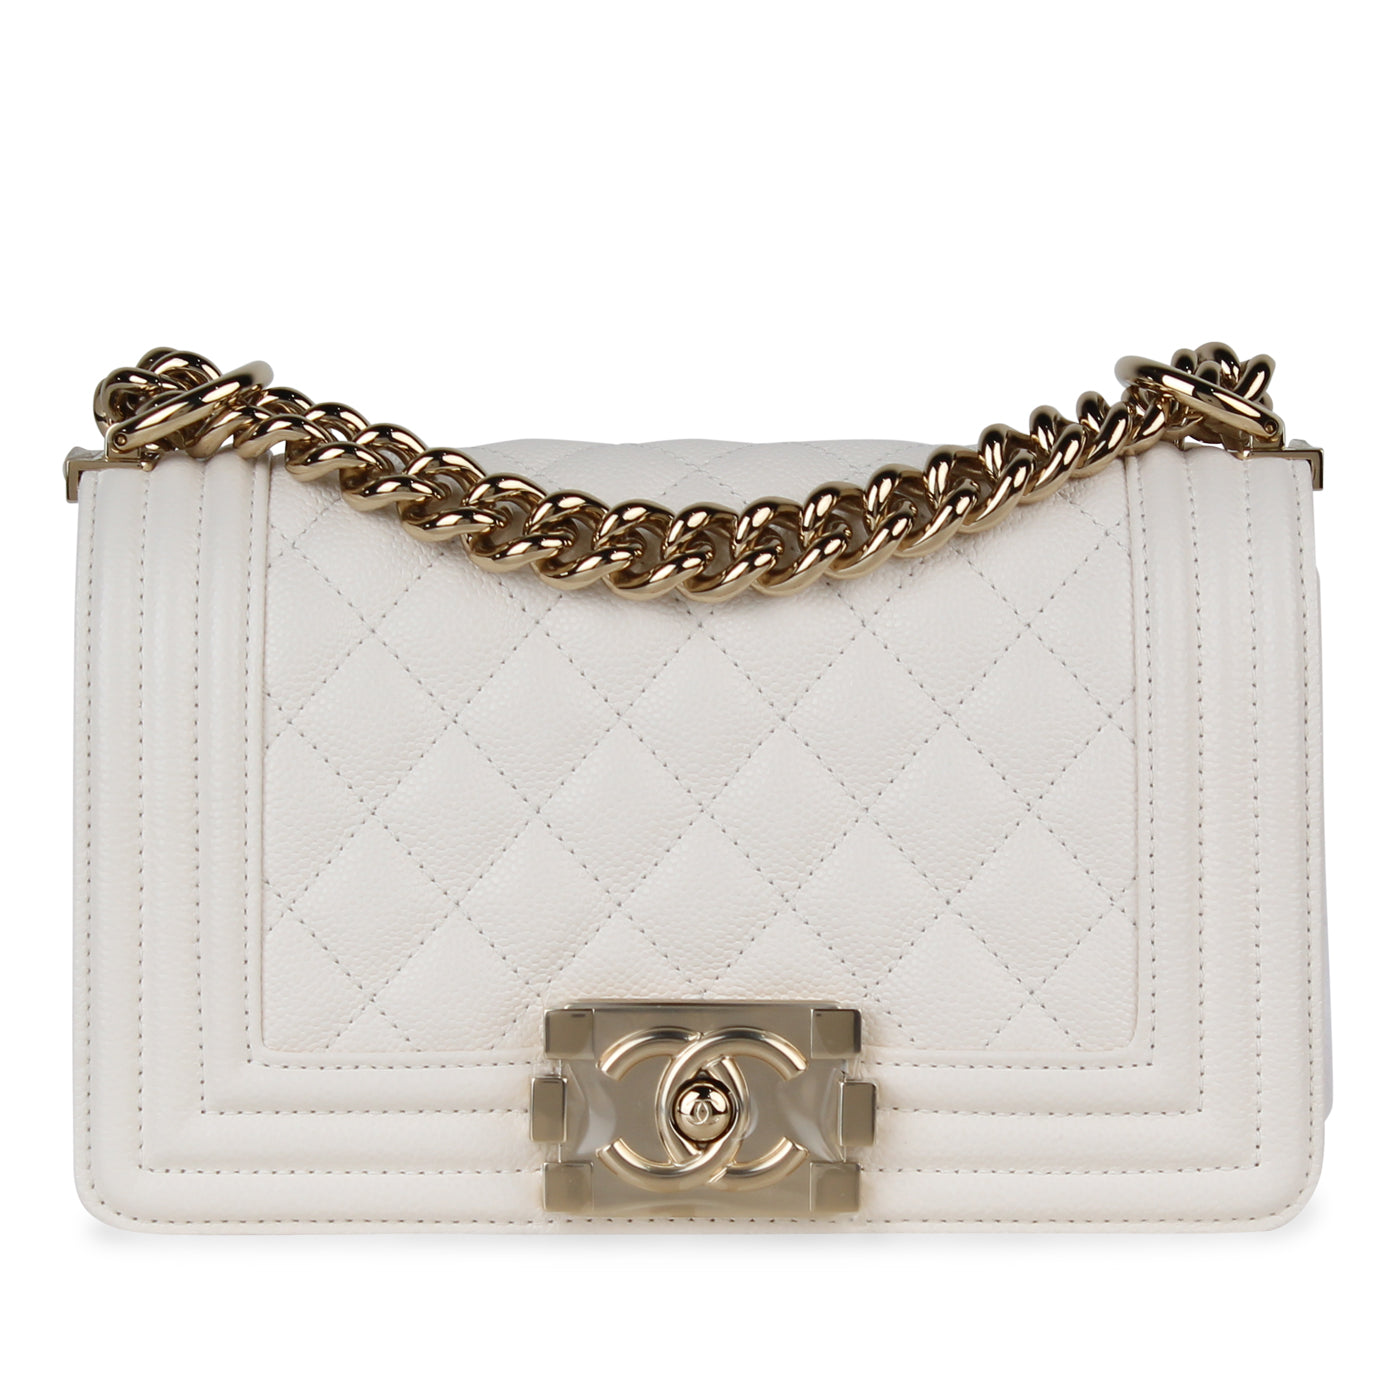 Chanel - Small Boy Bag - White Caviar Leather - CGHW - New | Bagista